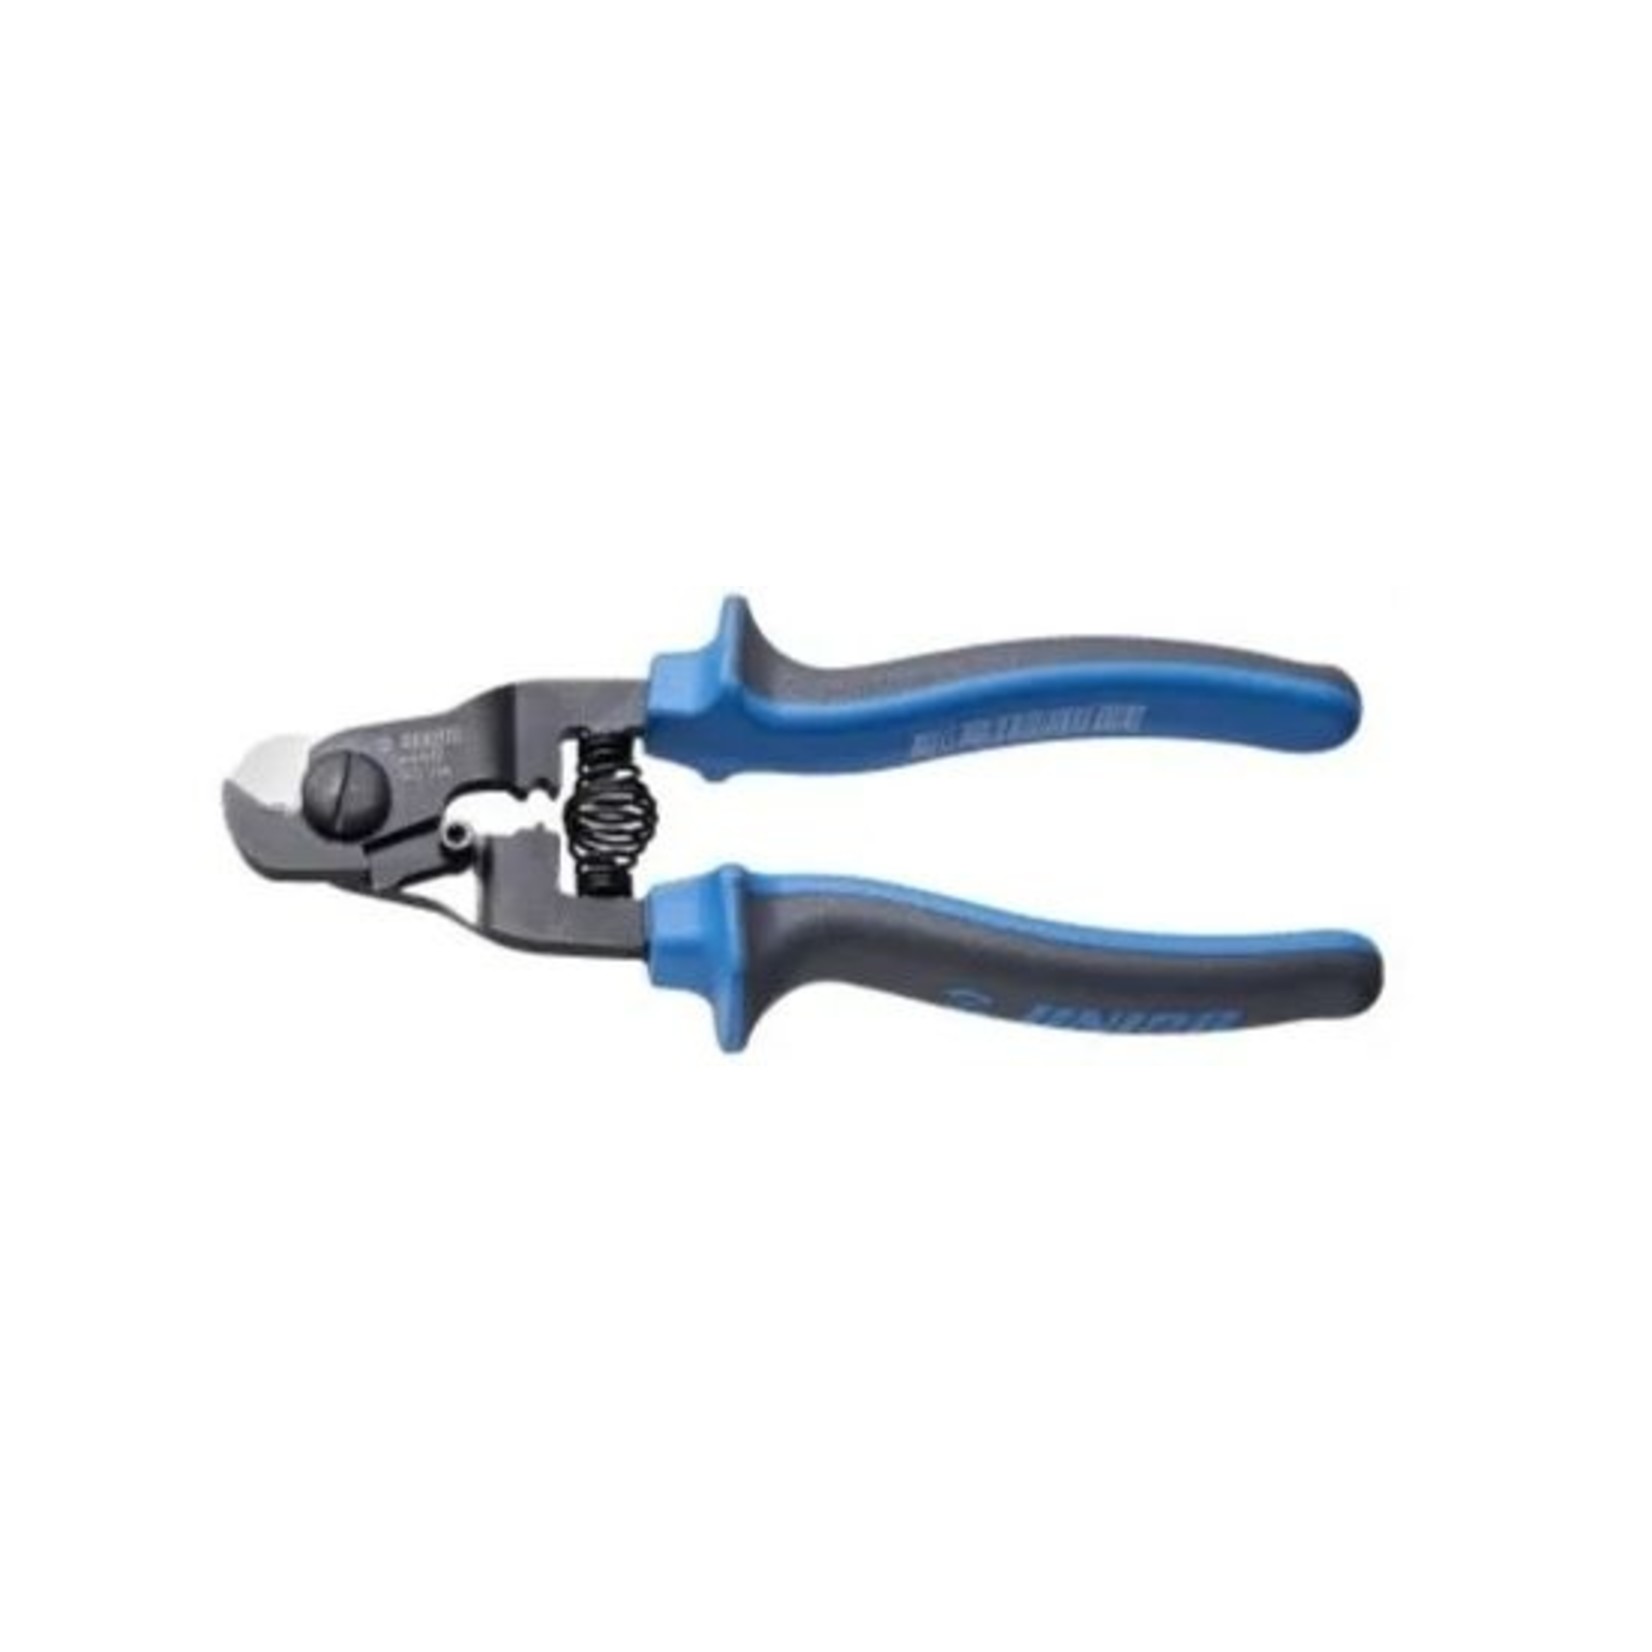 unior Unior Cable Housing Cutters 628147 Professional Bicycle Tool